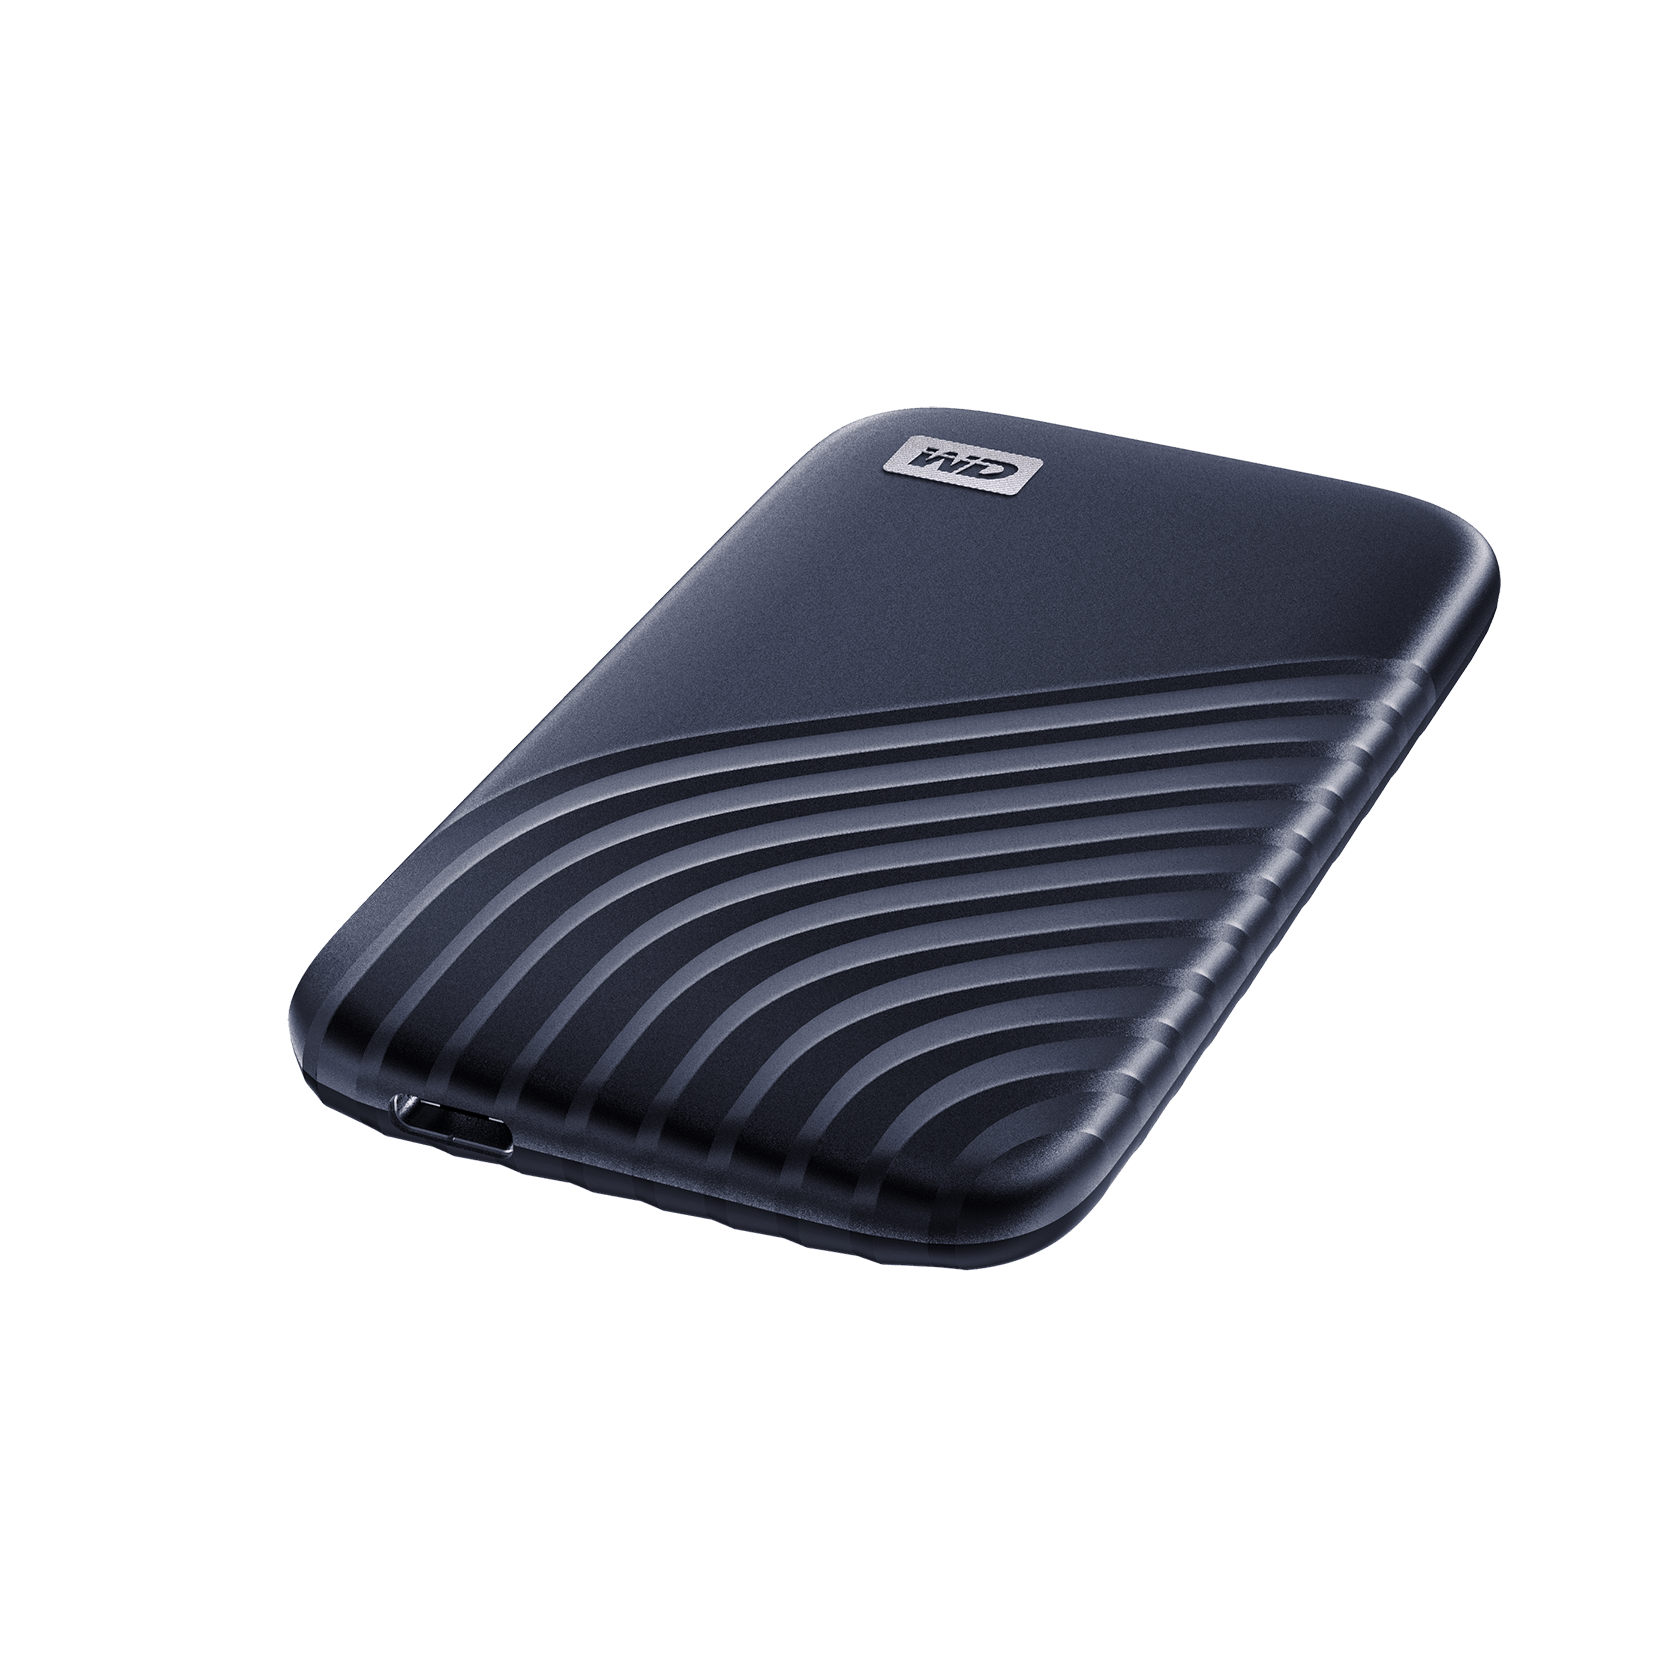 WD 1TB My Passport SSD, Portable External Solid State Drive, Blue - WDBAGF0010BBL-WESN - image 4 of 8